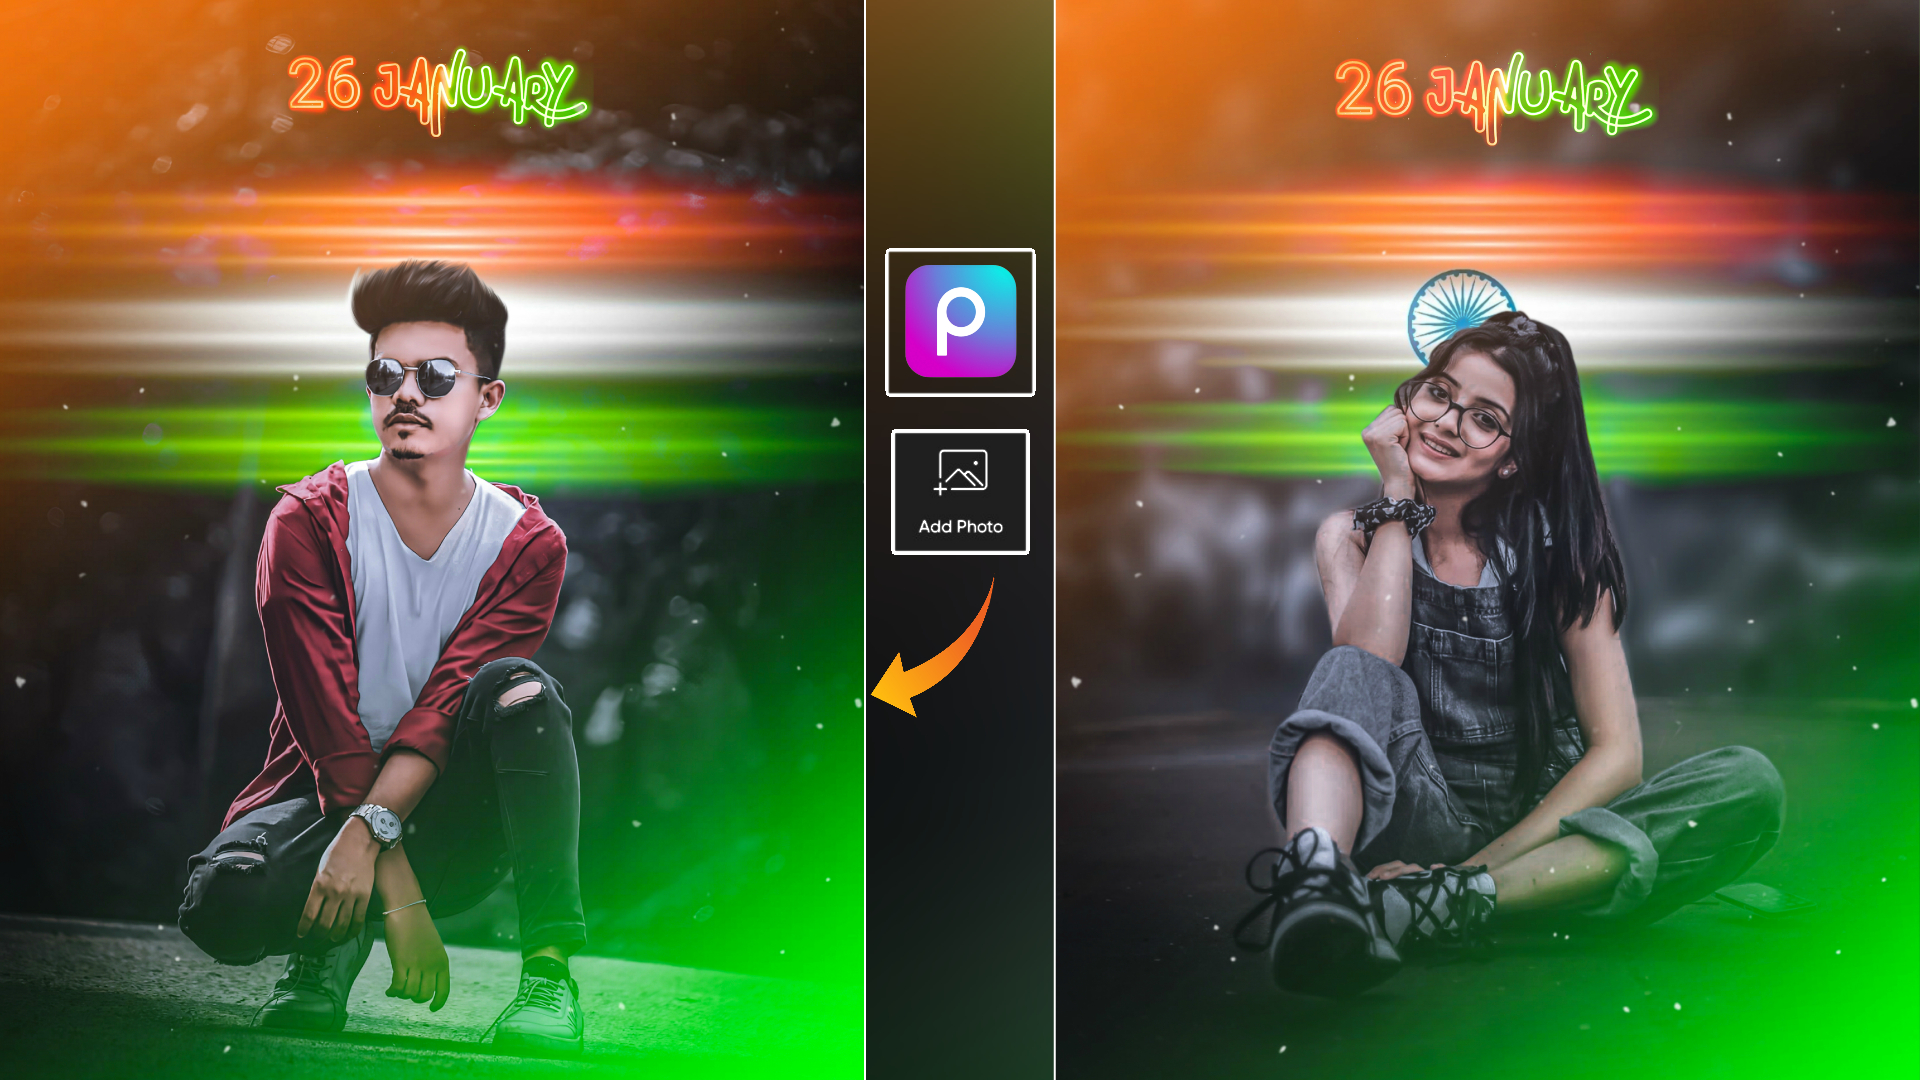 DJ PHOTO EDITING - Download Unlimited Full HD Background And PNG, Lightroom  Presets & Photo Editing Apps Free